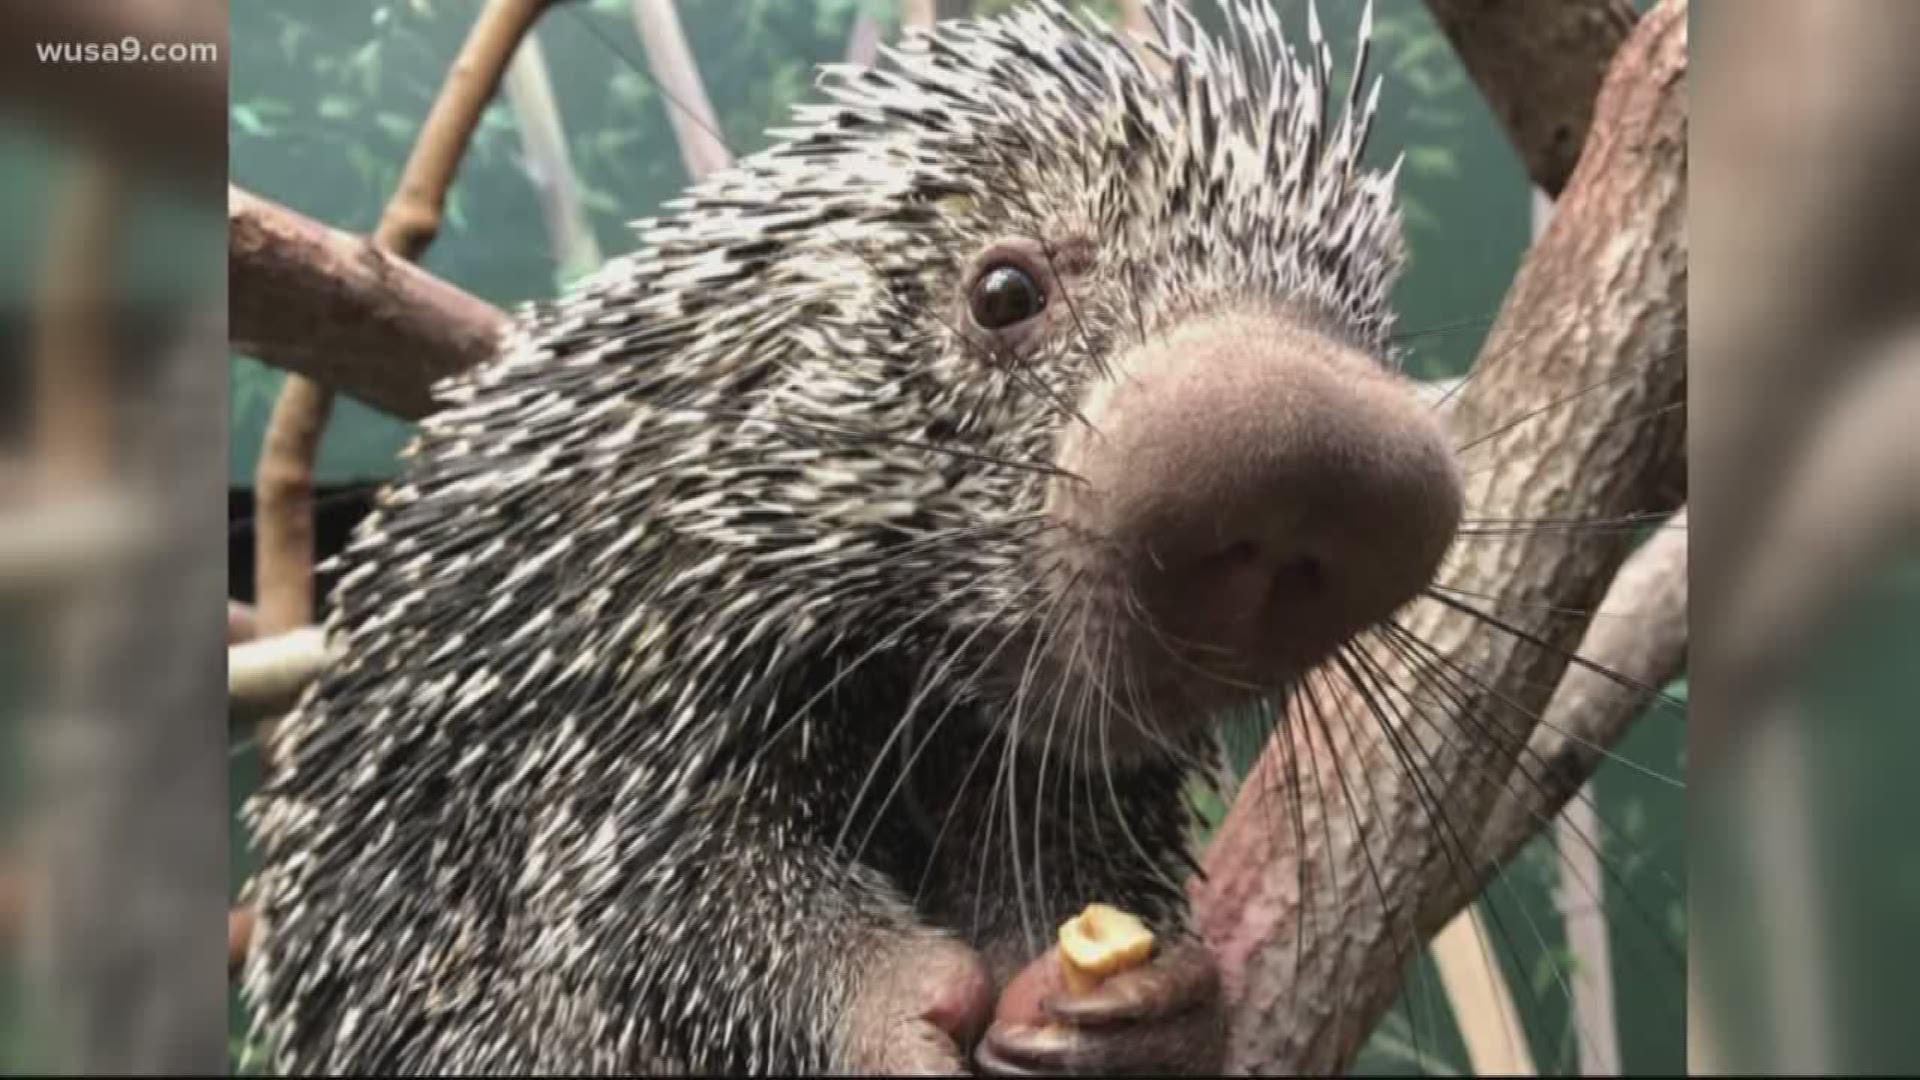 24-hundred votes came in during a naming campaign sponsored by the zoo. Quilliam got 43 percent of the votes. Prickles came in second with 27 percent.